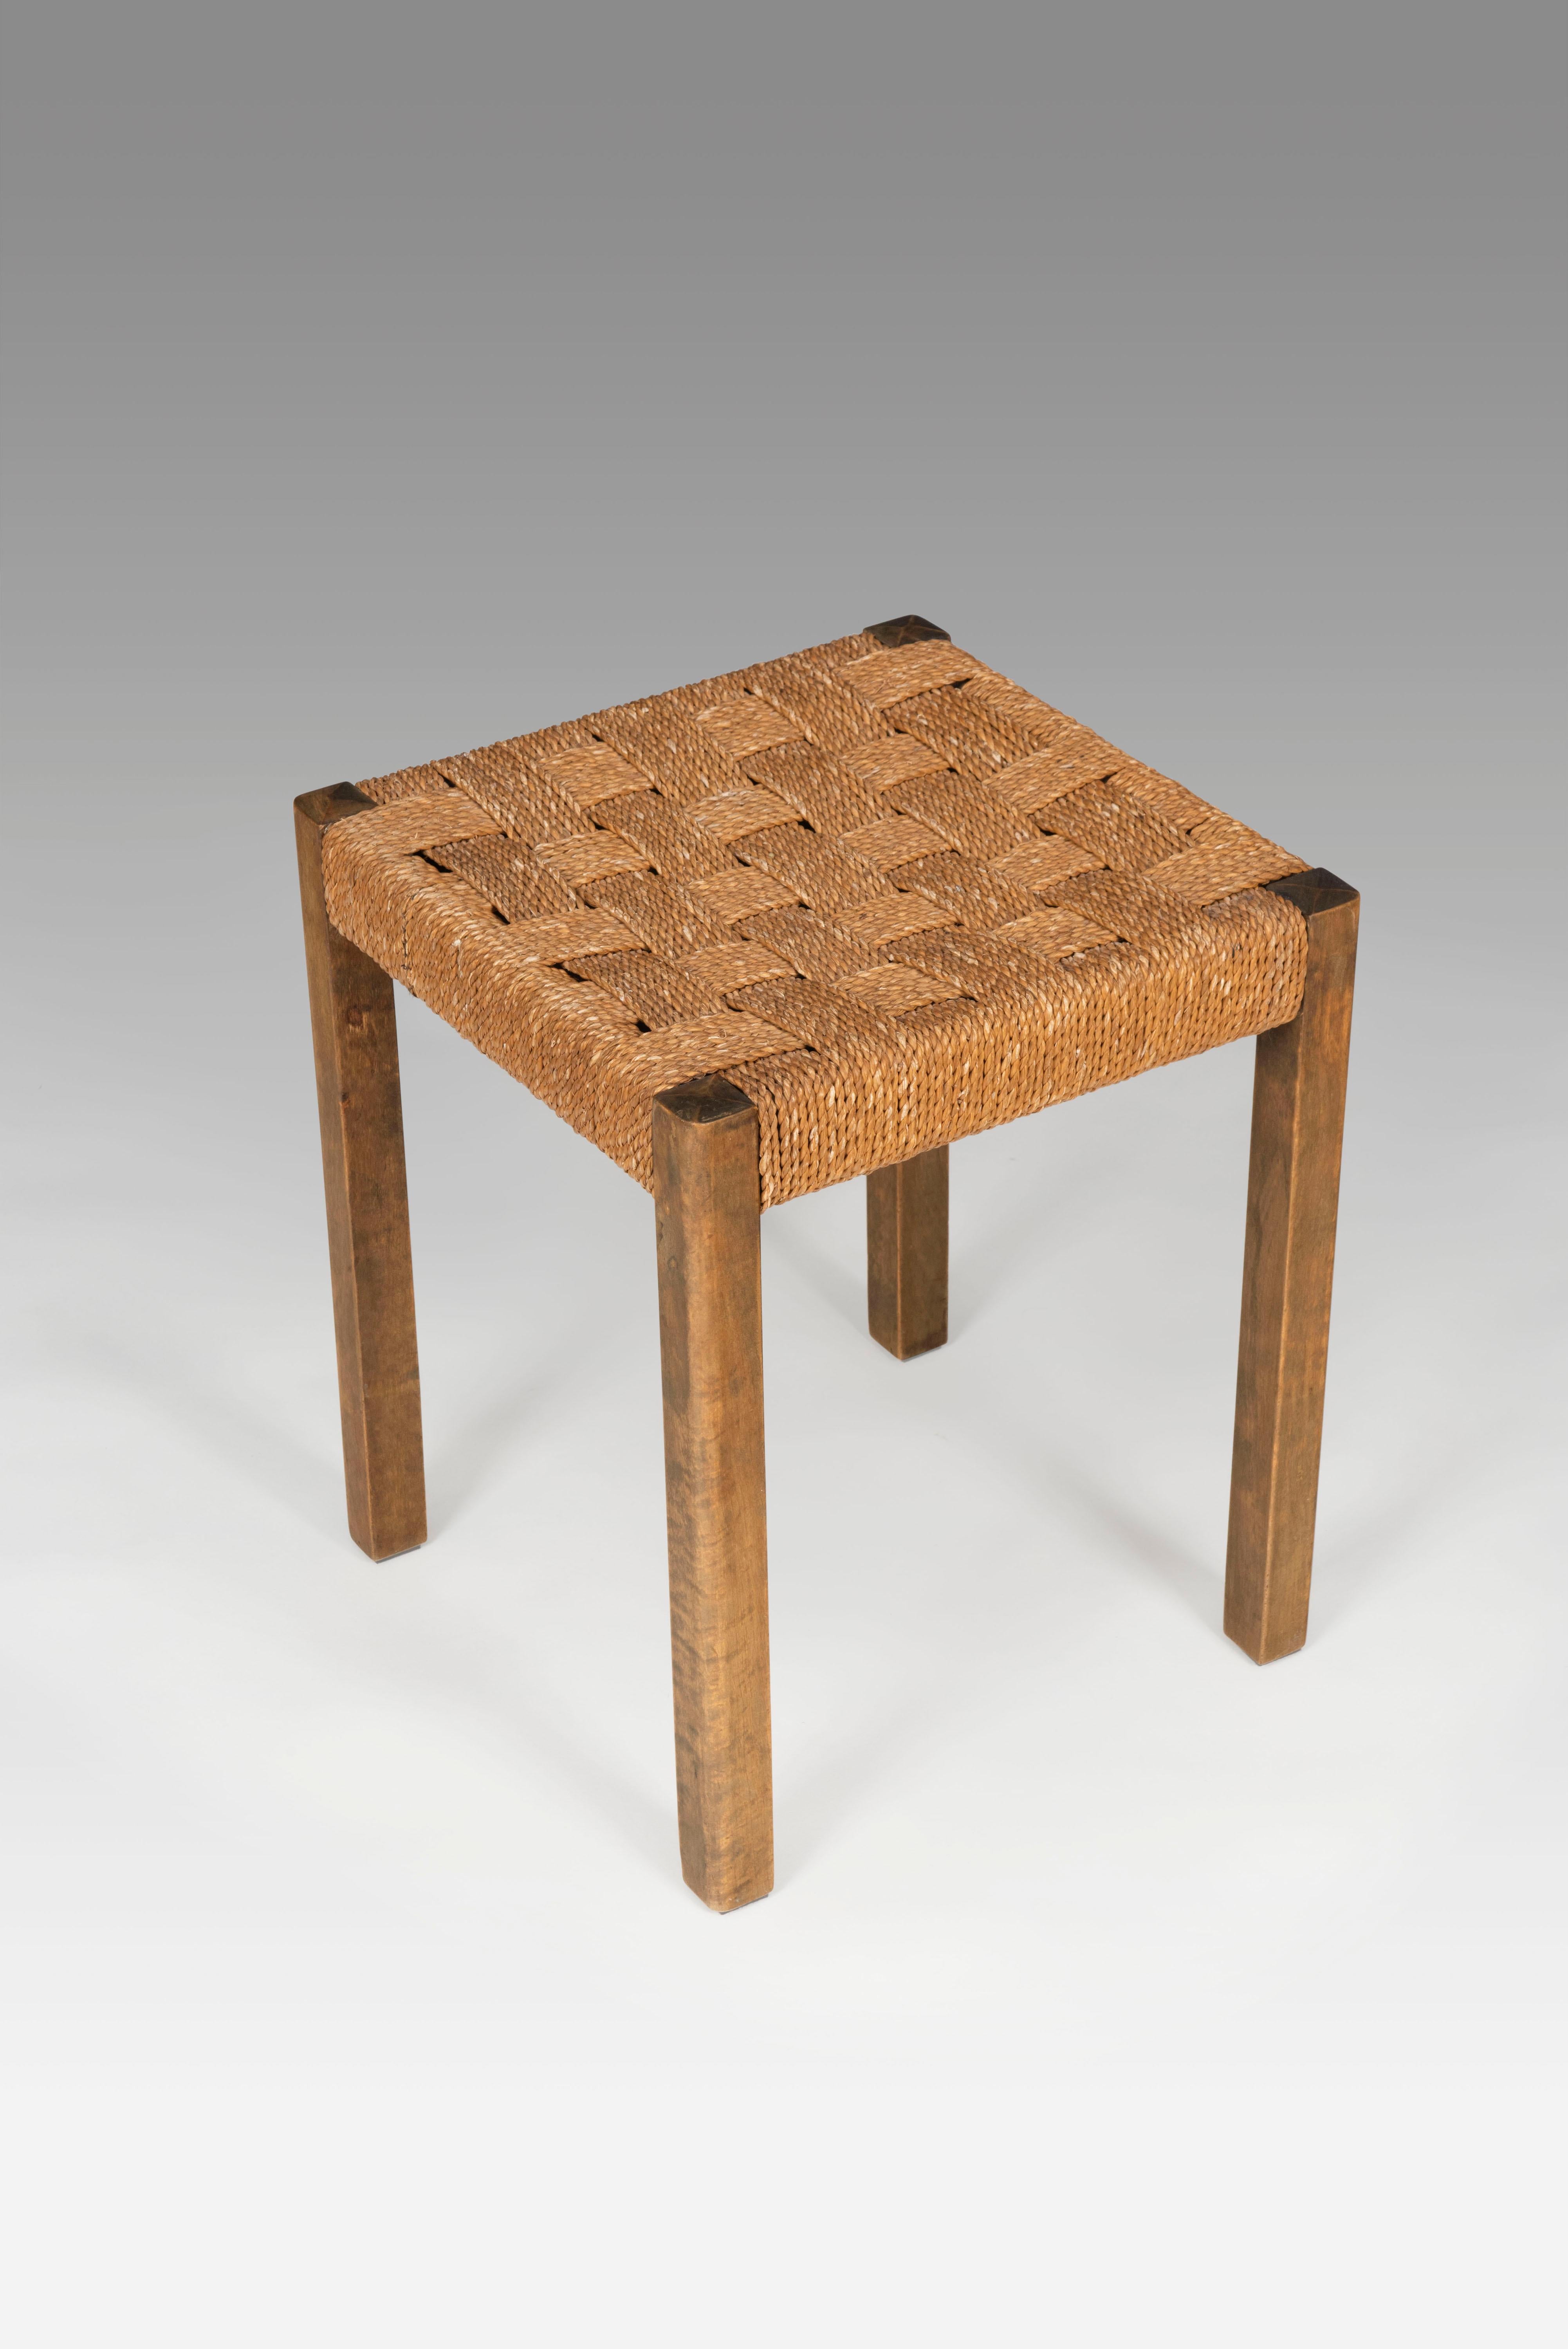 A stool by Axel Larsson for Svenska Möbelfabriken (SMF) Bodafors, designed circa 1929. The stool is made of stained beech with seagrass. Gently restored.
 